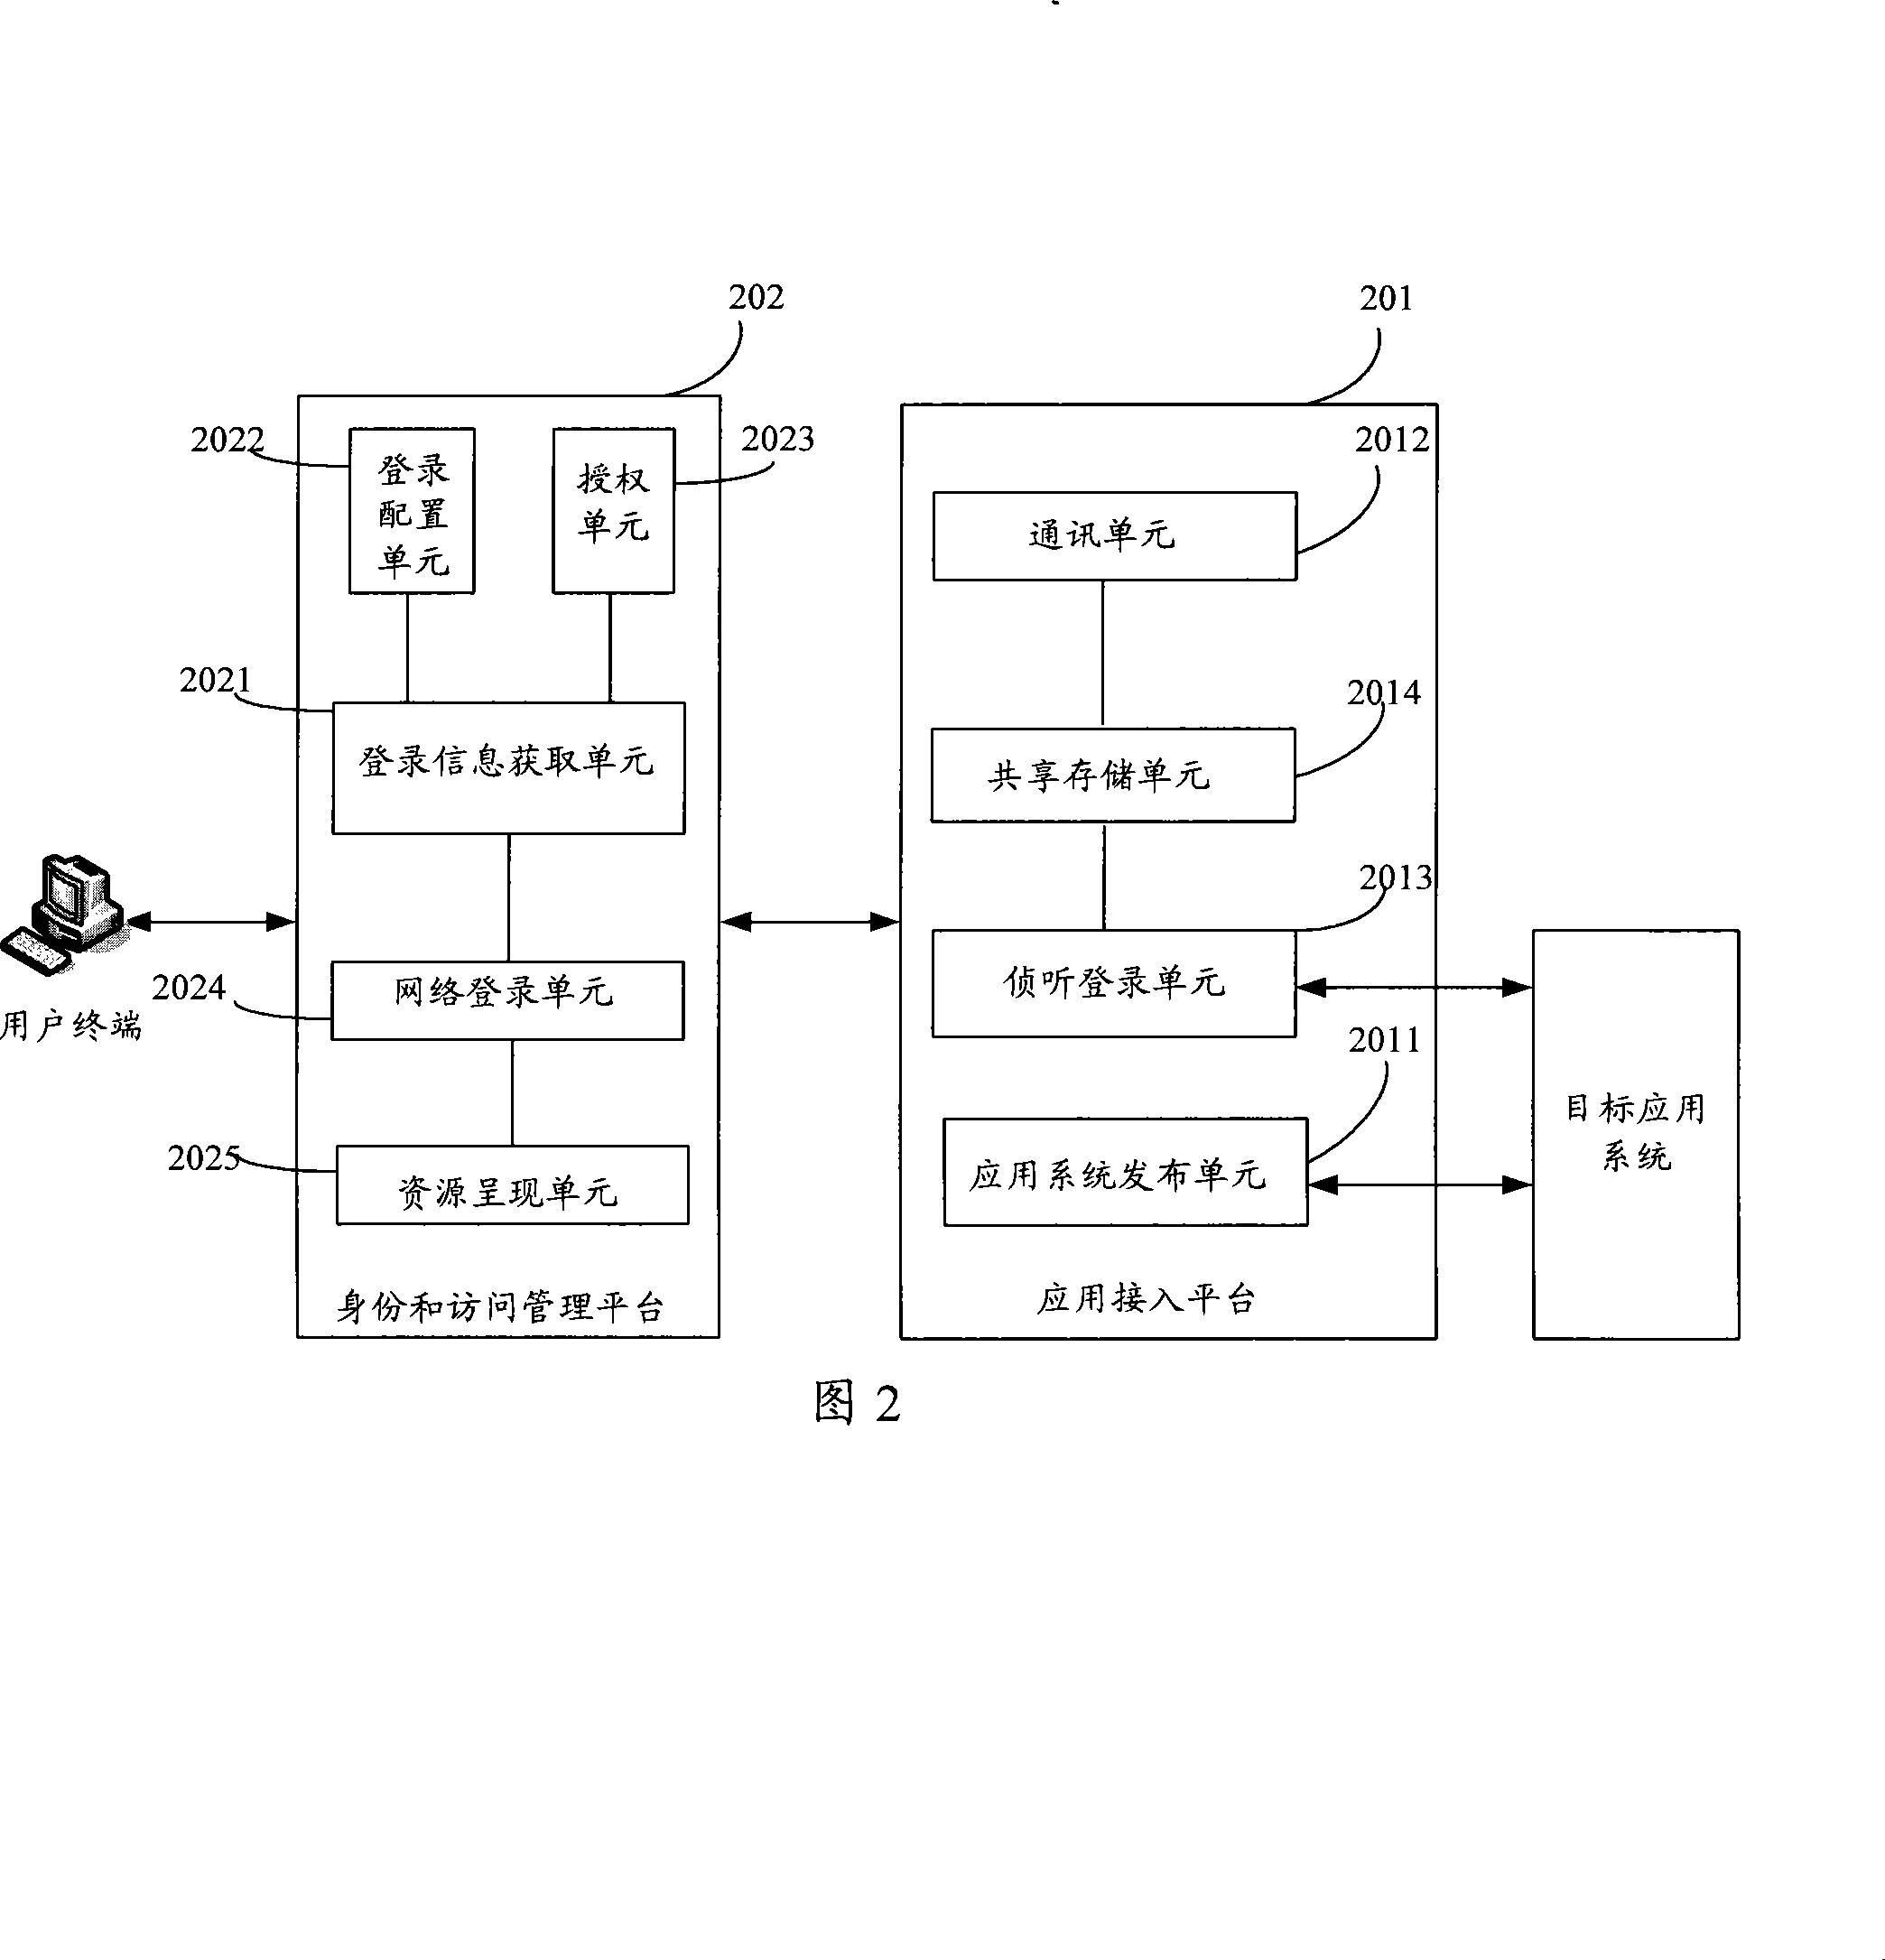 A network logging on system and the corresponding configuration method and methods for logging on the application system